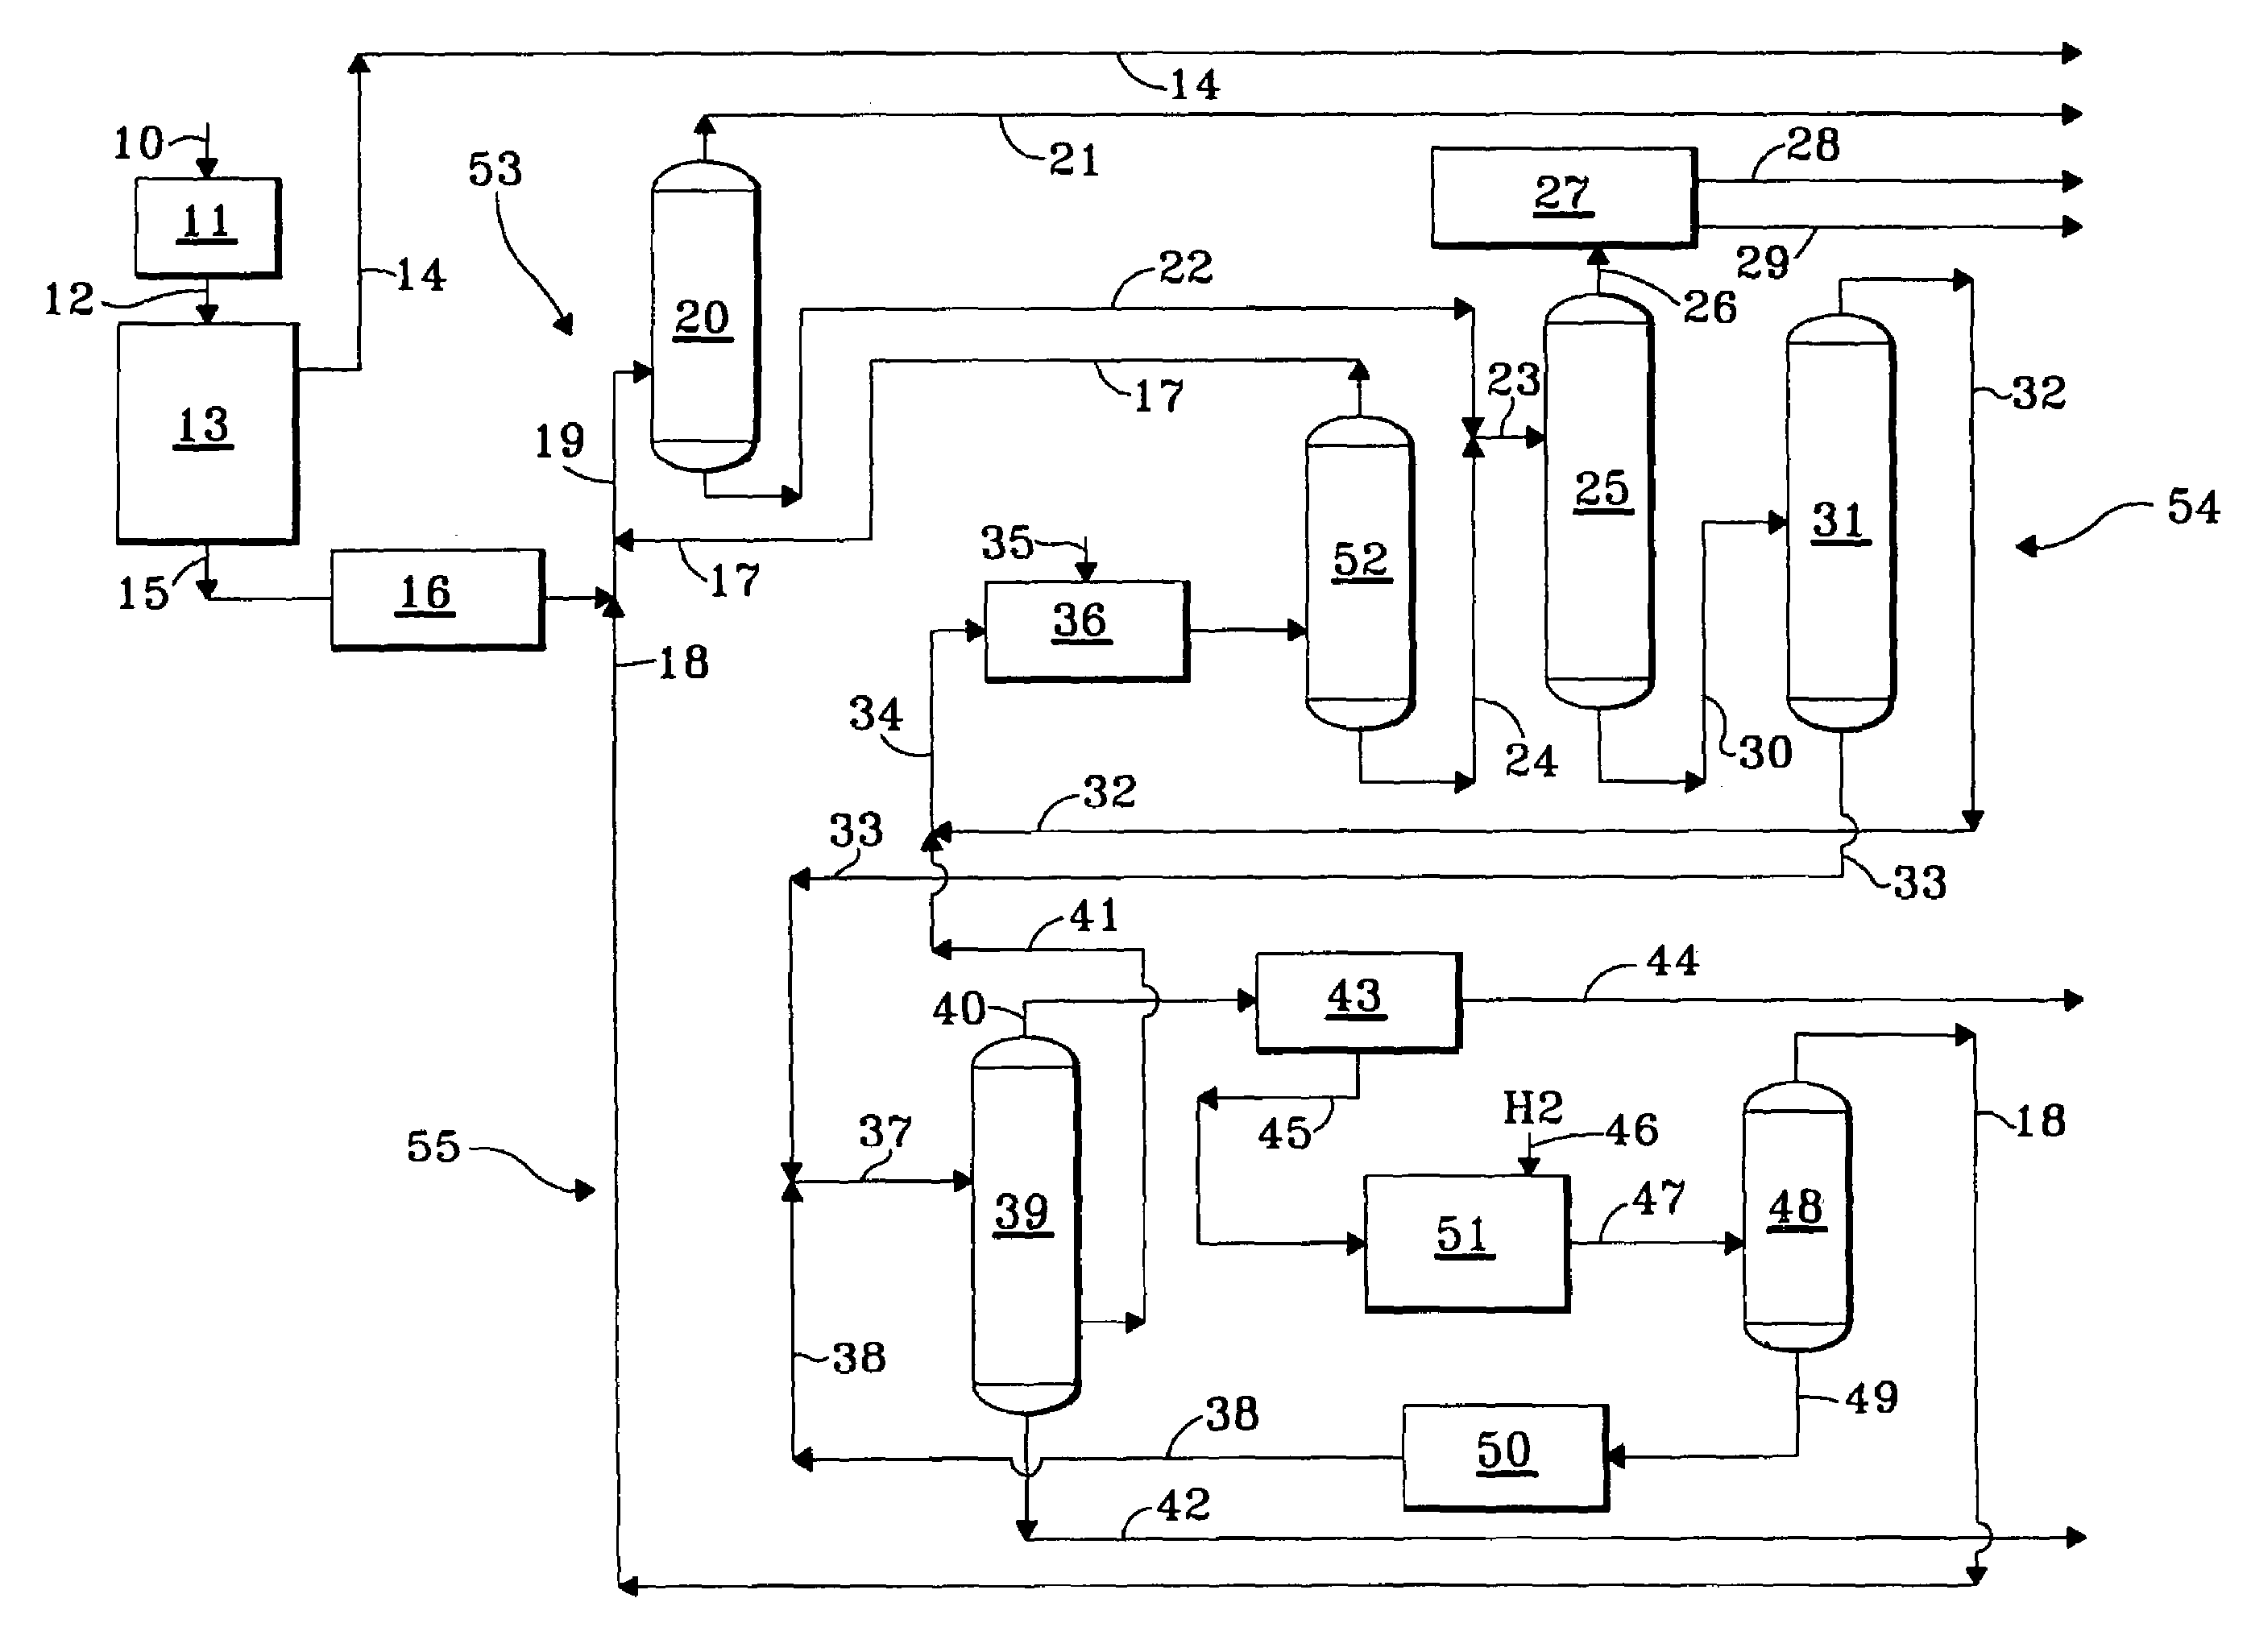 Integrated apparatus for aromatics production